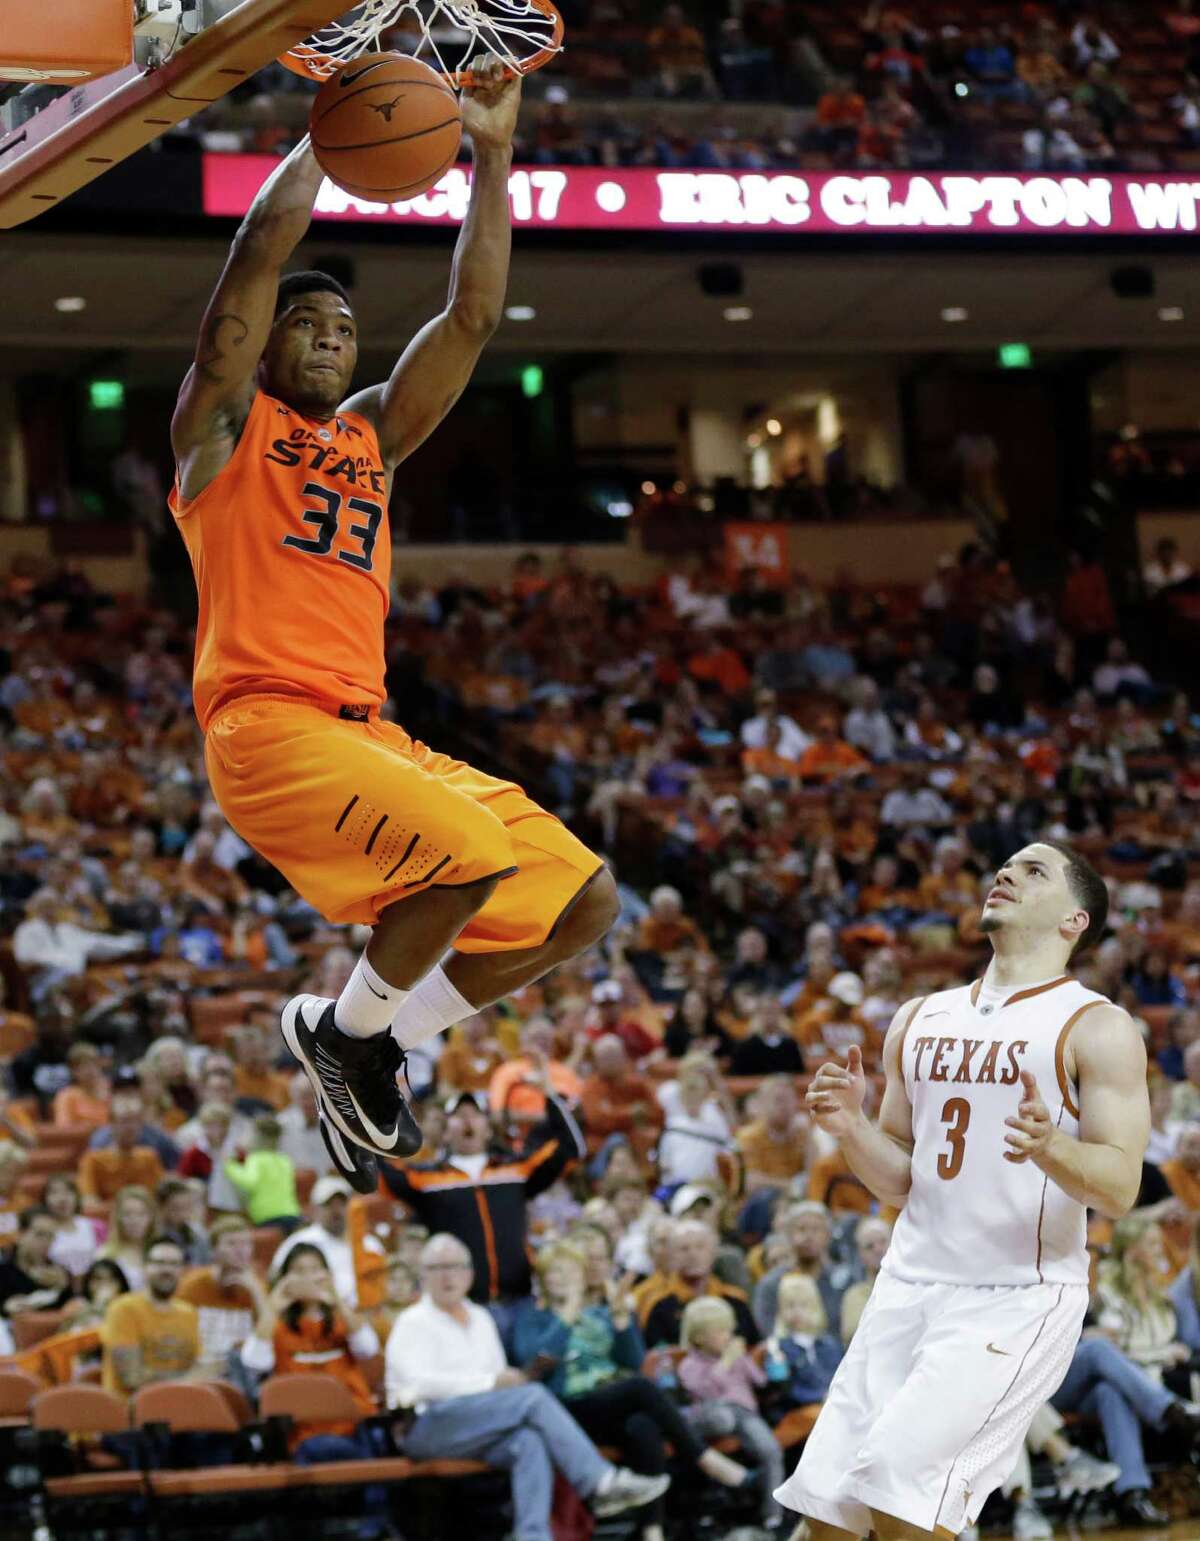 Oklahoma State's Marcus Smart (33) puts the finishing touch on two of his 23 points as Texas' Javan Felix (3) does little more than watch in the second half.